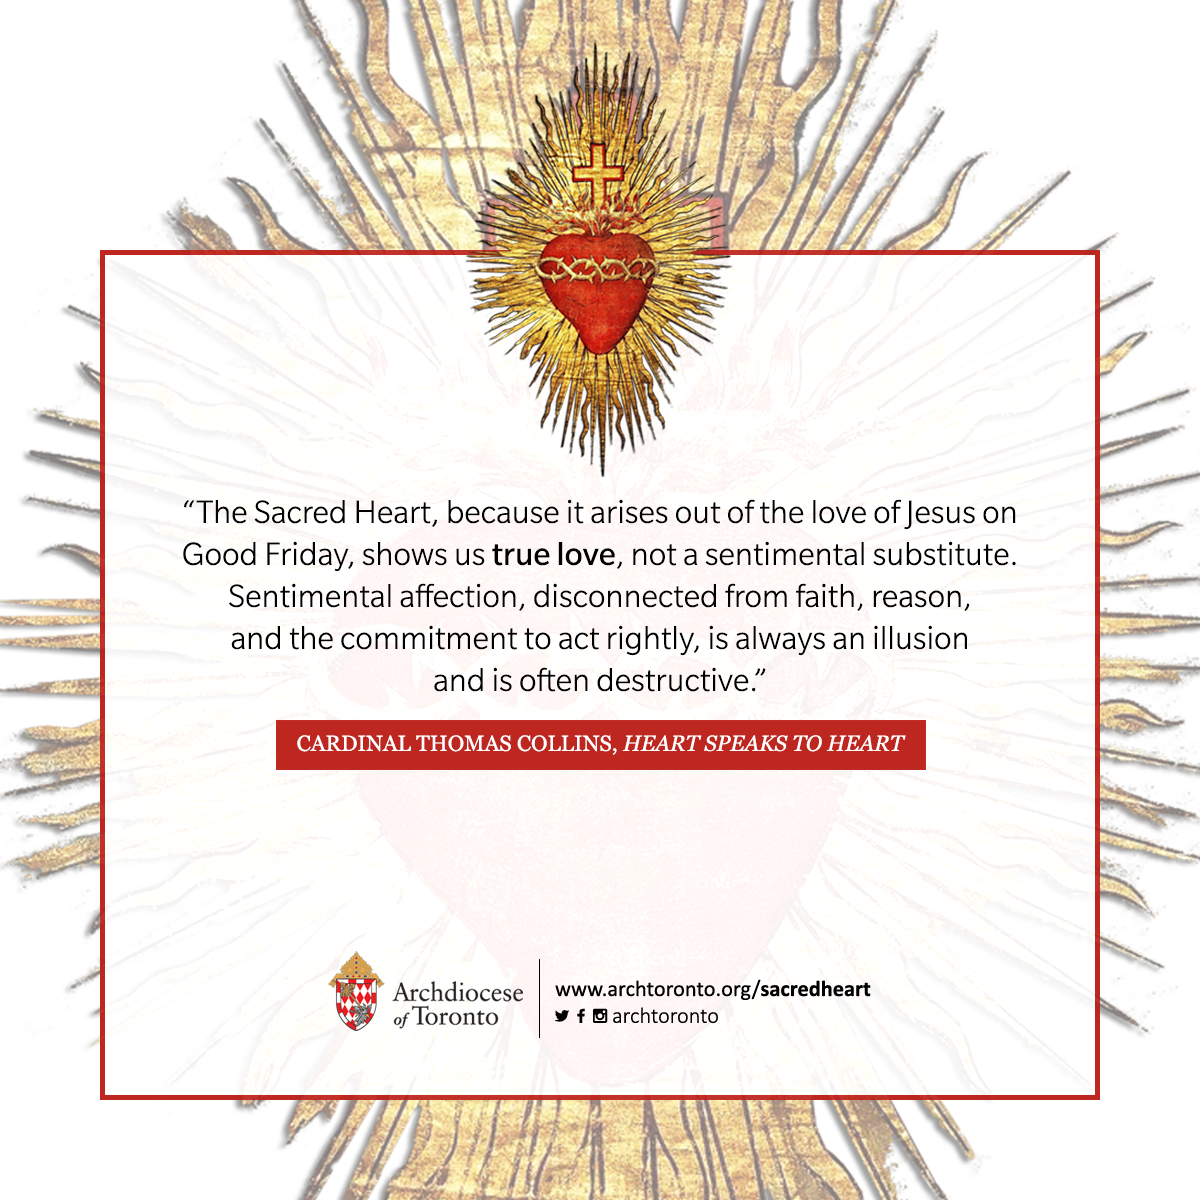 The Sacred Heart, because it arises out of the love of Jesus on Good Friday, shows us true love, not a sentimental substitute. Sentimental affection, disconnected from faith, reason, and the commitment to act rightly, is always an illusion and is often destructive.